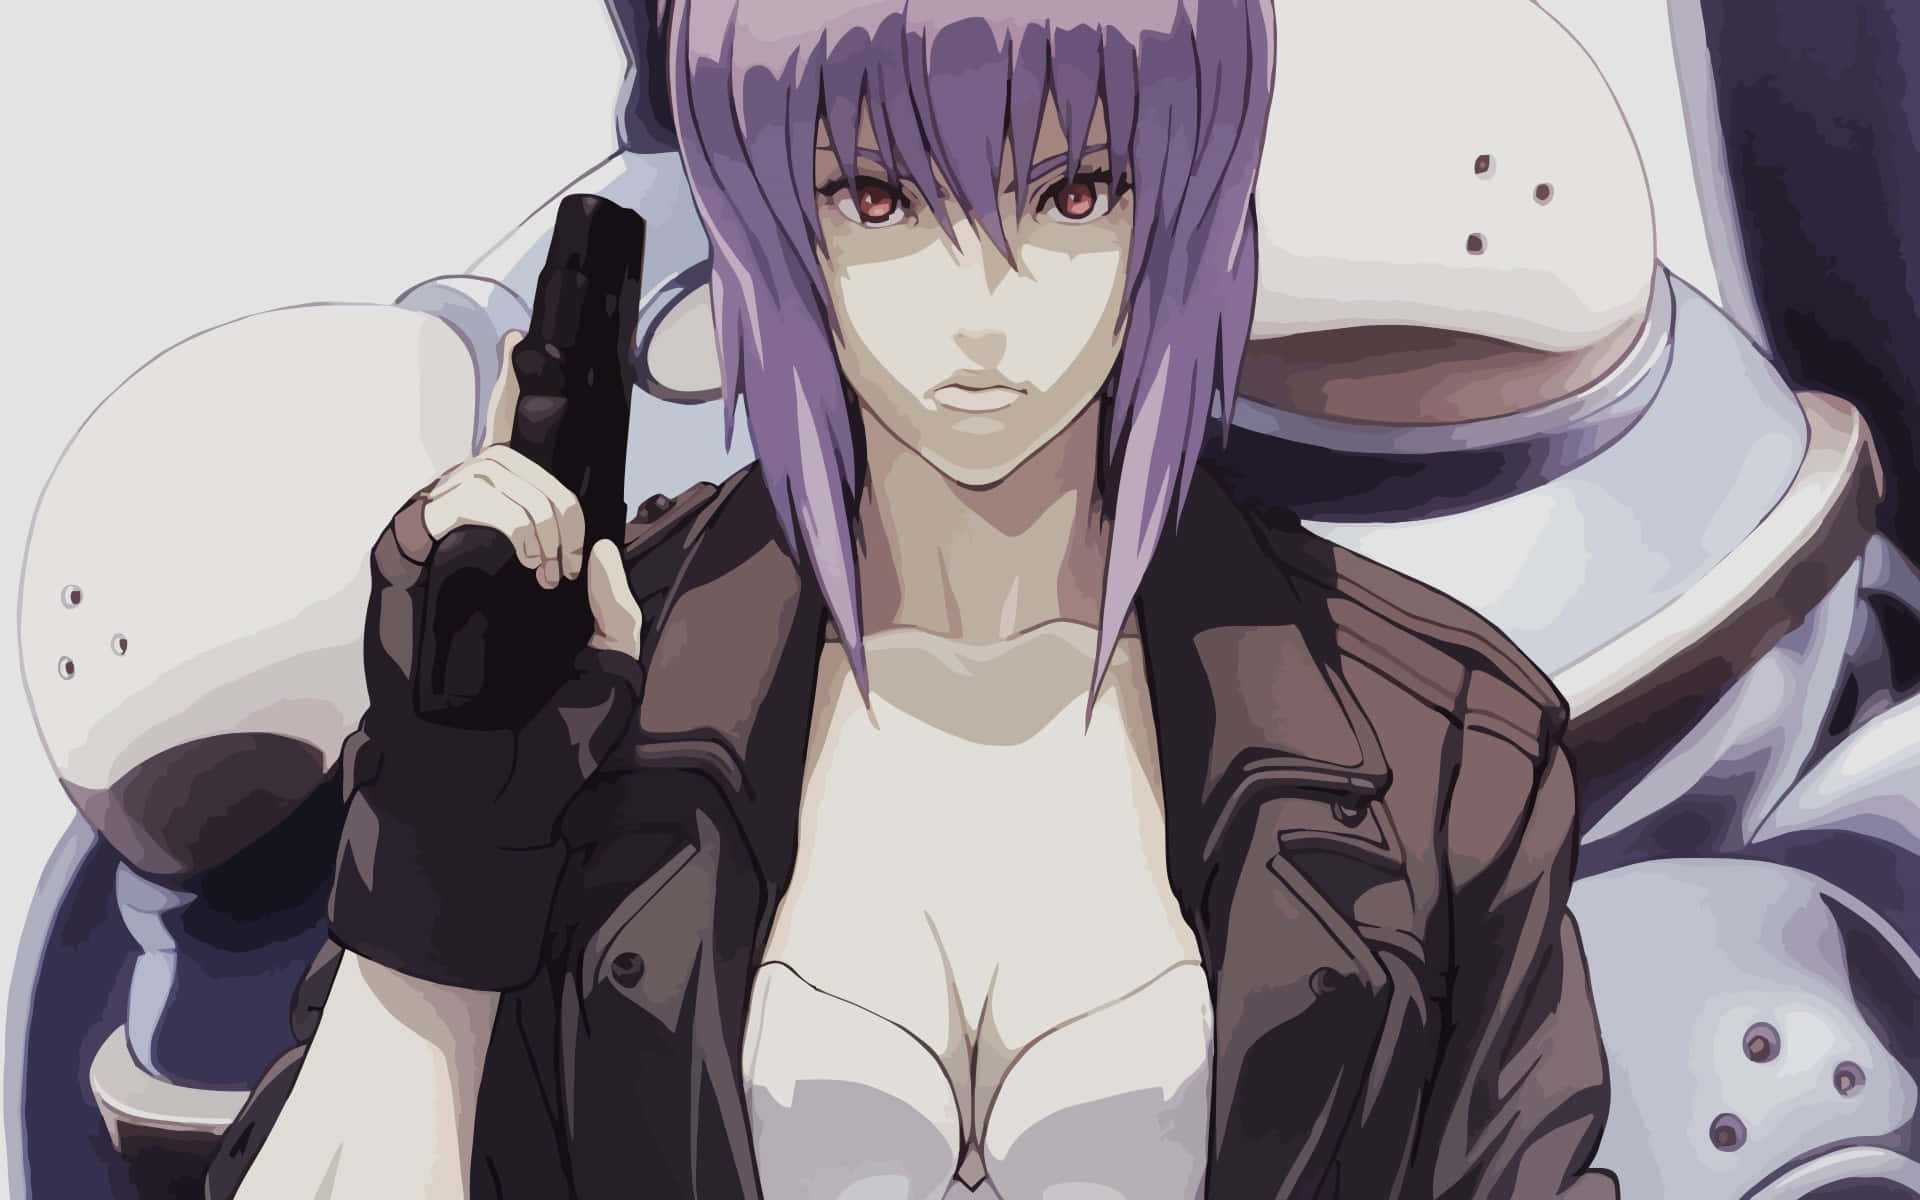 7. "Motoko Kusanagi" from the anime series "Ghost in the Shell" - wide 10